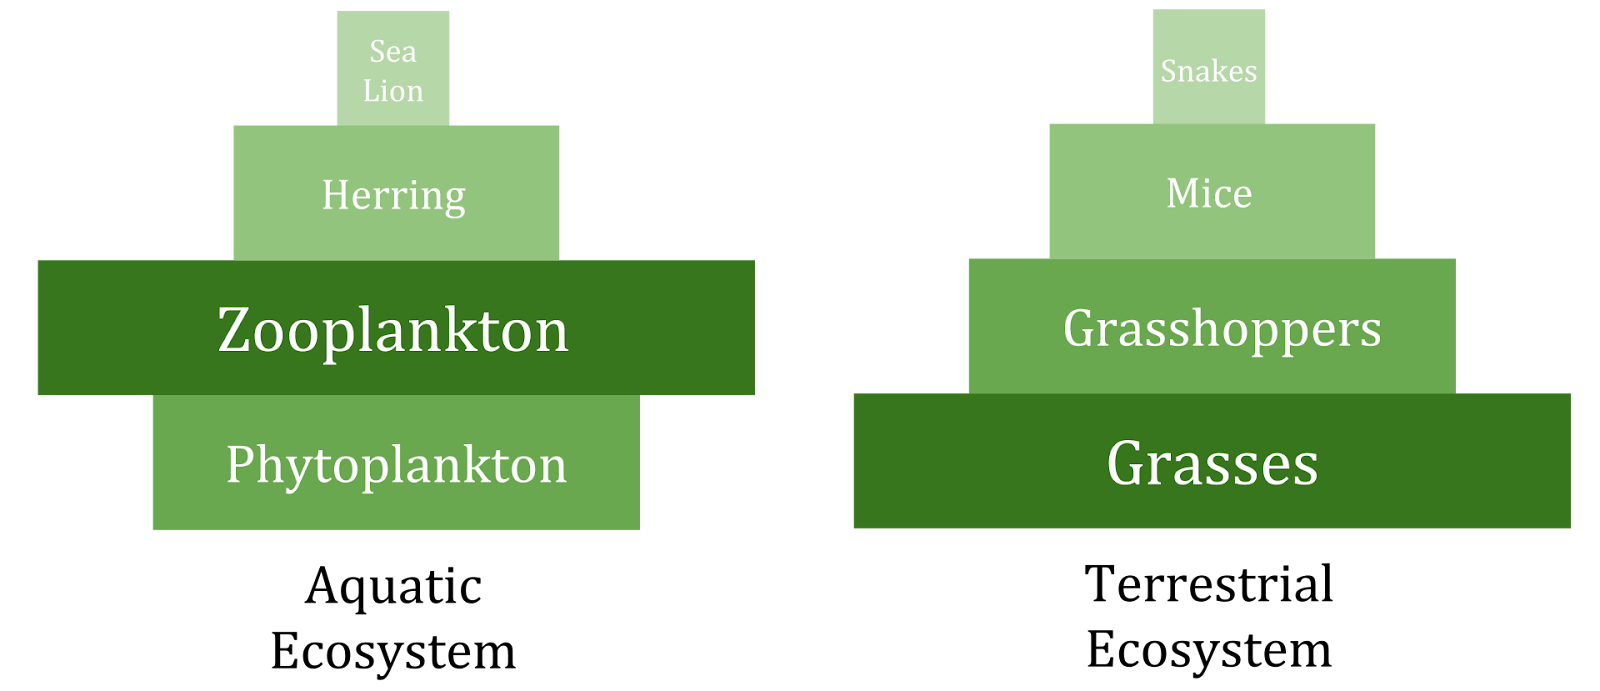 Two stacks of green rectangles represent aquatic and terrestrial ecosystems. The aquatic ecosystem shows a medium large amount of phytoplankton, a large amount of zooplankton, a medium small amount of herring, and a very small amount of sea lions from bottom to top of the stack. The terrestrial ecosystem shows a pyramid of incrementally shorter rectangles with grasses, grasshoppers, mice, and snakes from bottom to top.